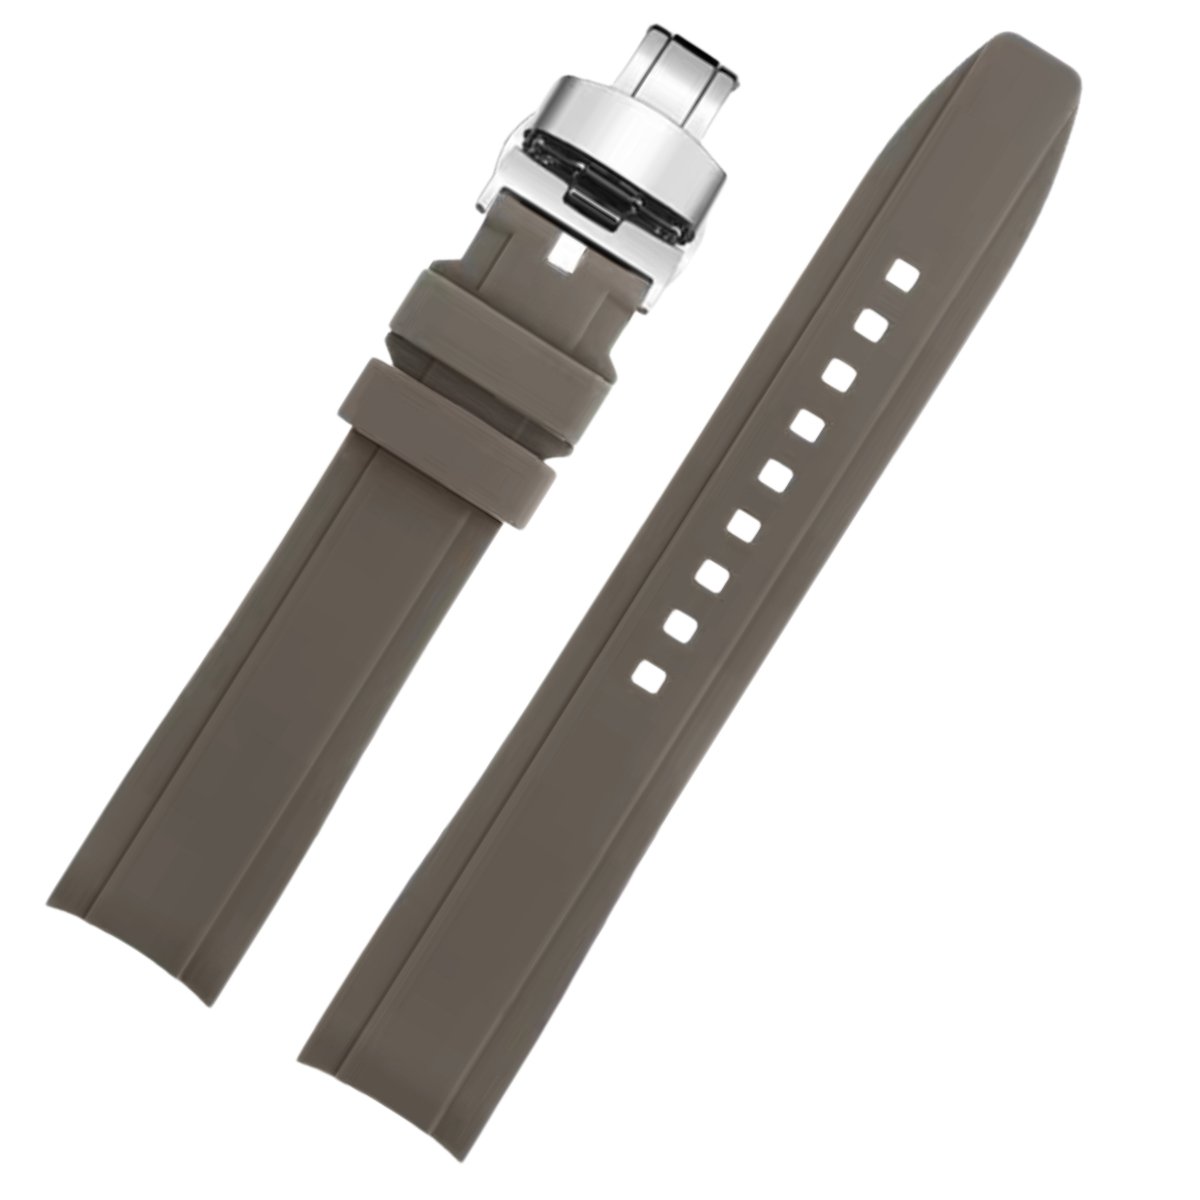 Dexter Silicone Curved Lug End Strap Grey (Silver Deployment Clasp) (Rolex Replacement) -StrapSeeker